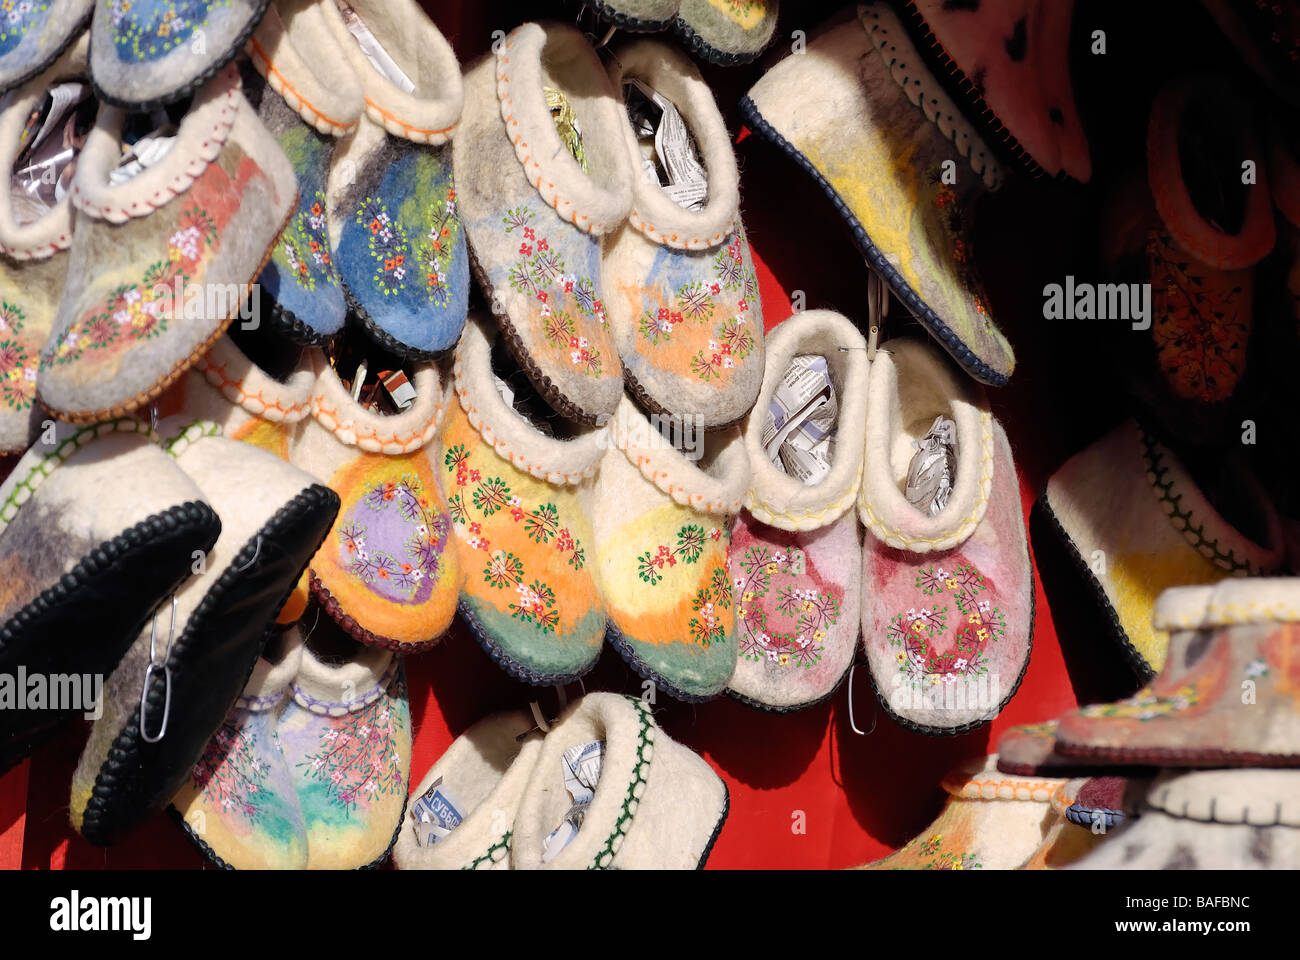 Chaussons russe Moscou souvenirs street market Photo Stock - Alamy